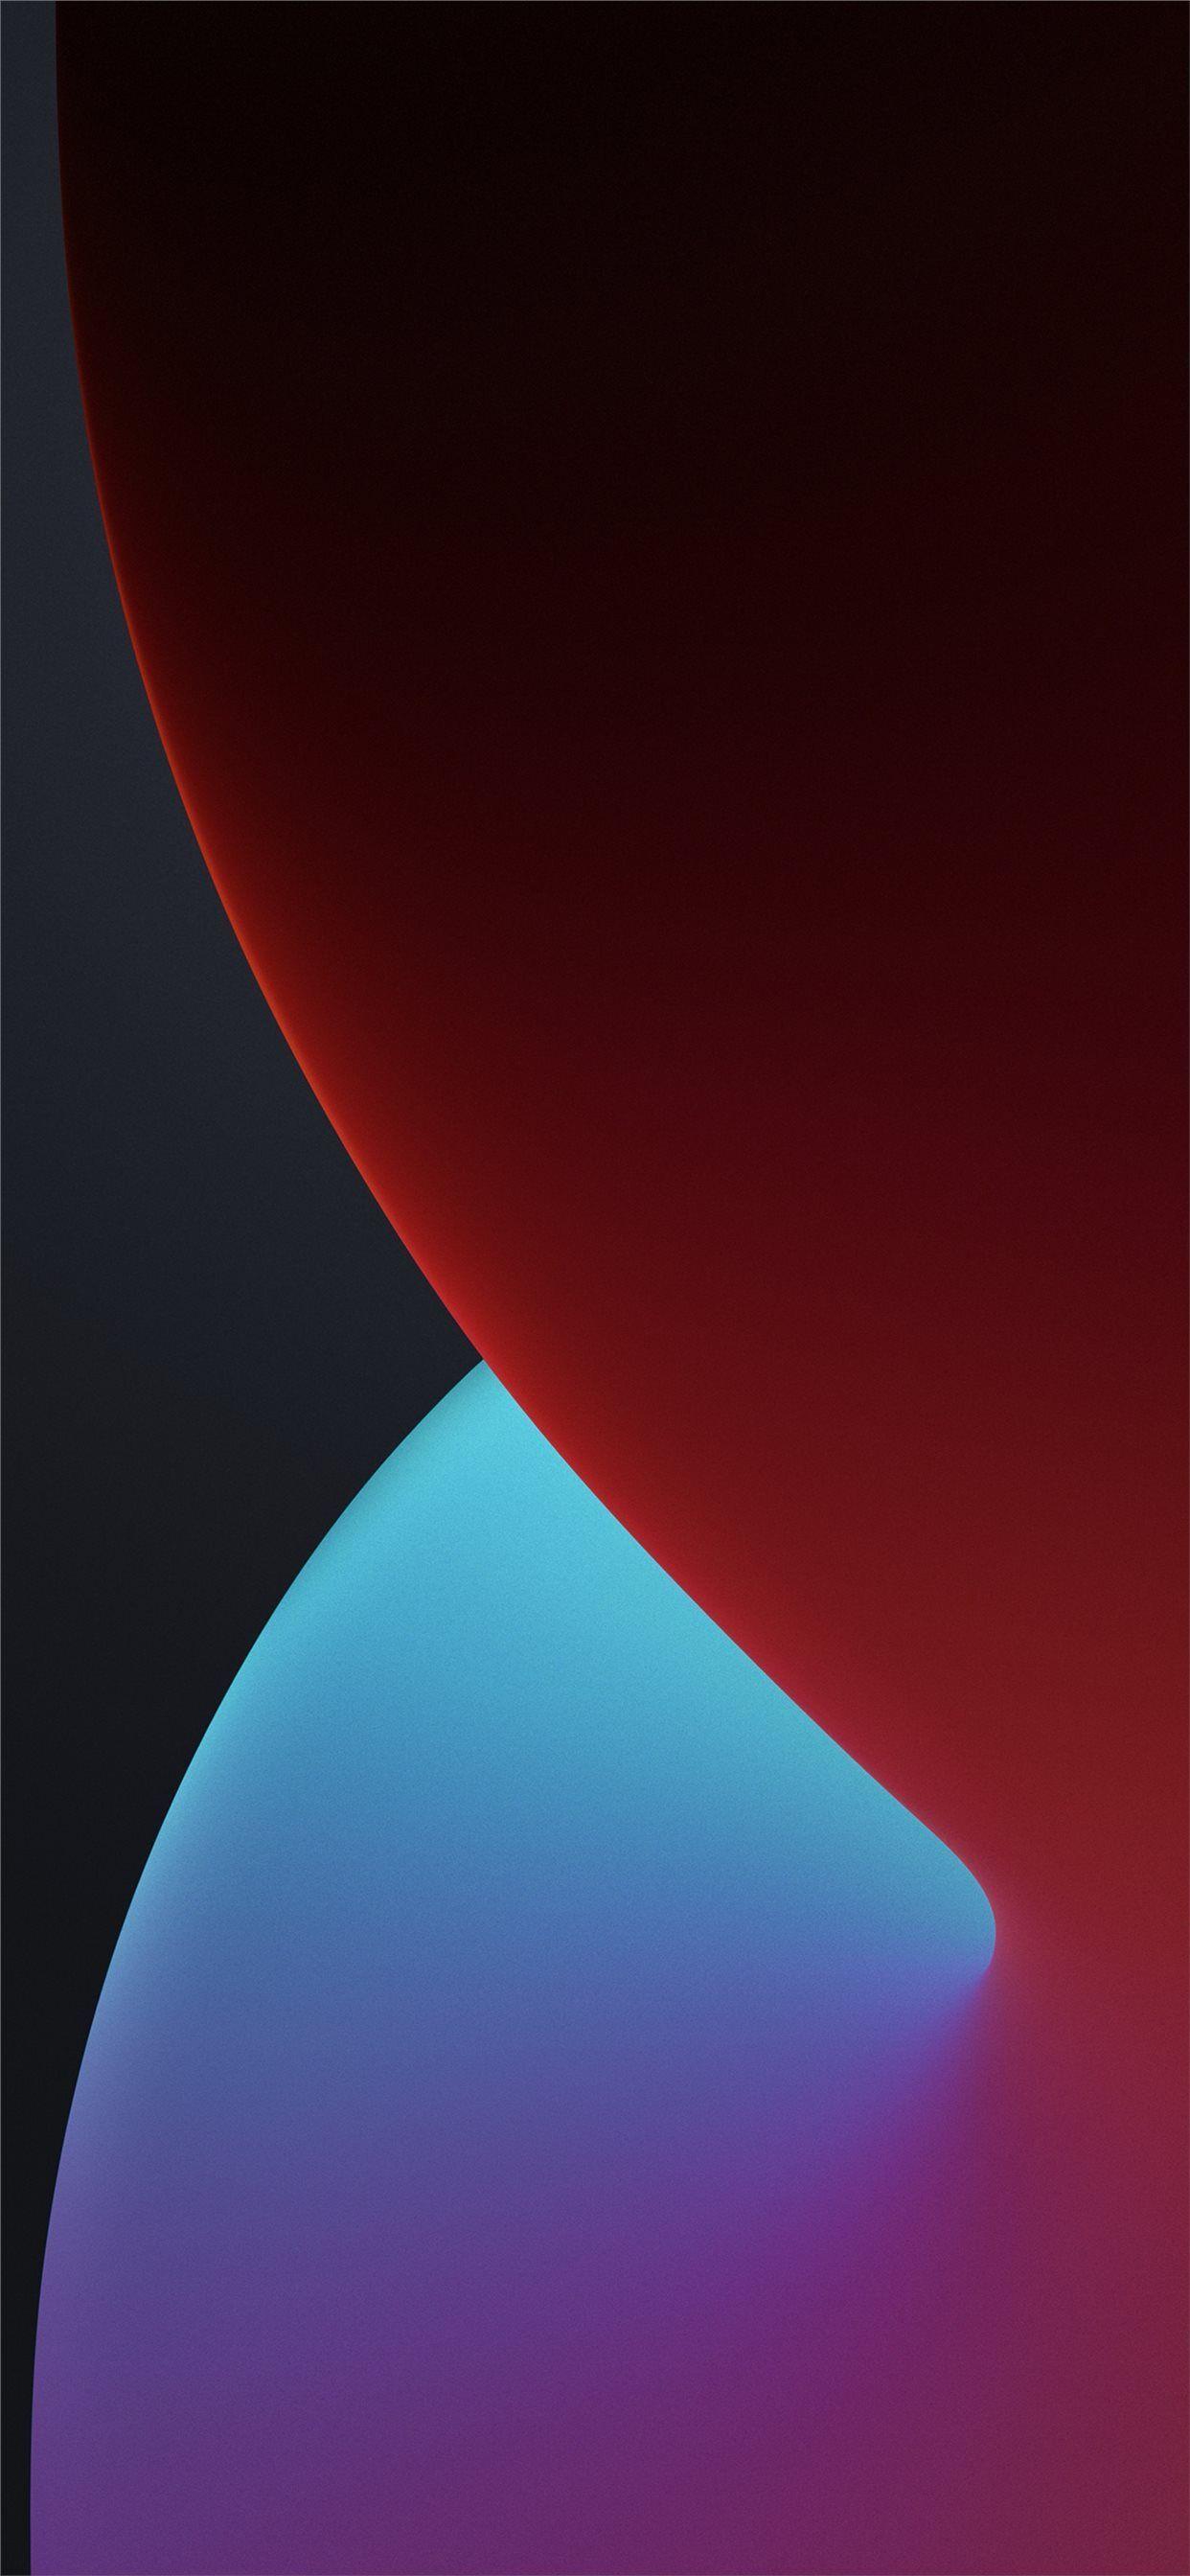 Iphone 11 Wallpaper Pictures  Download Free Images on Unsplash